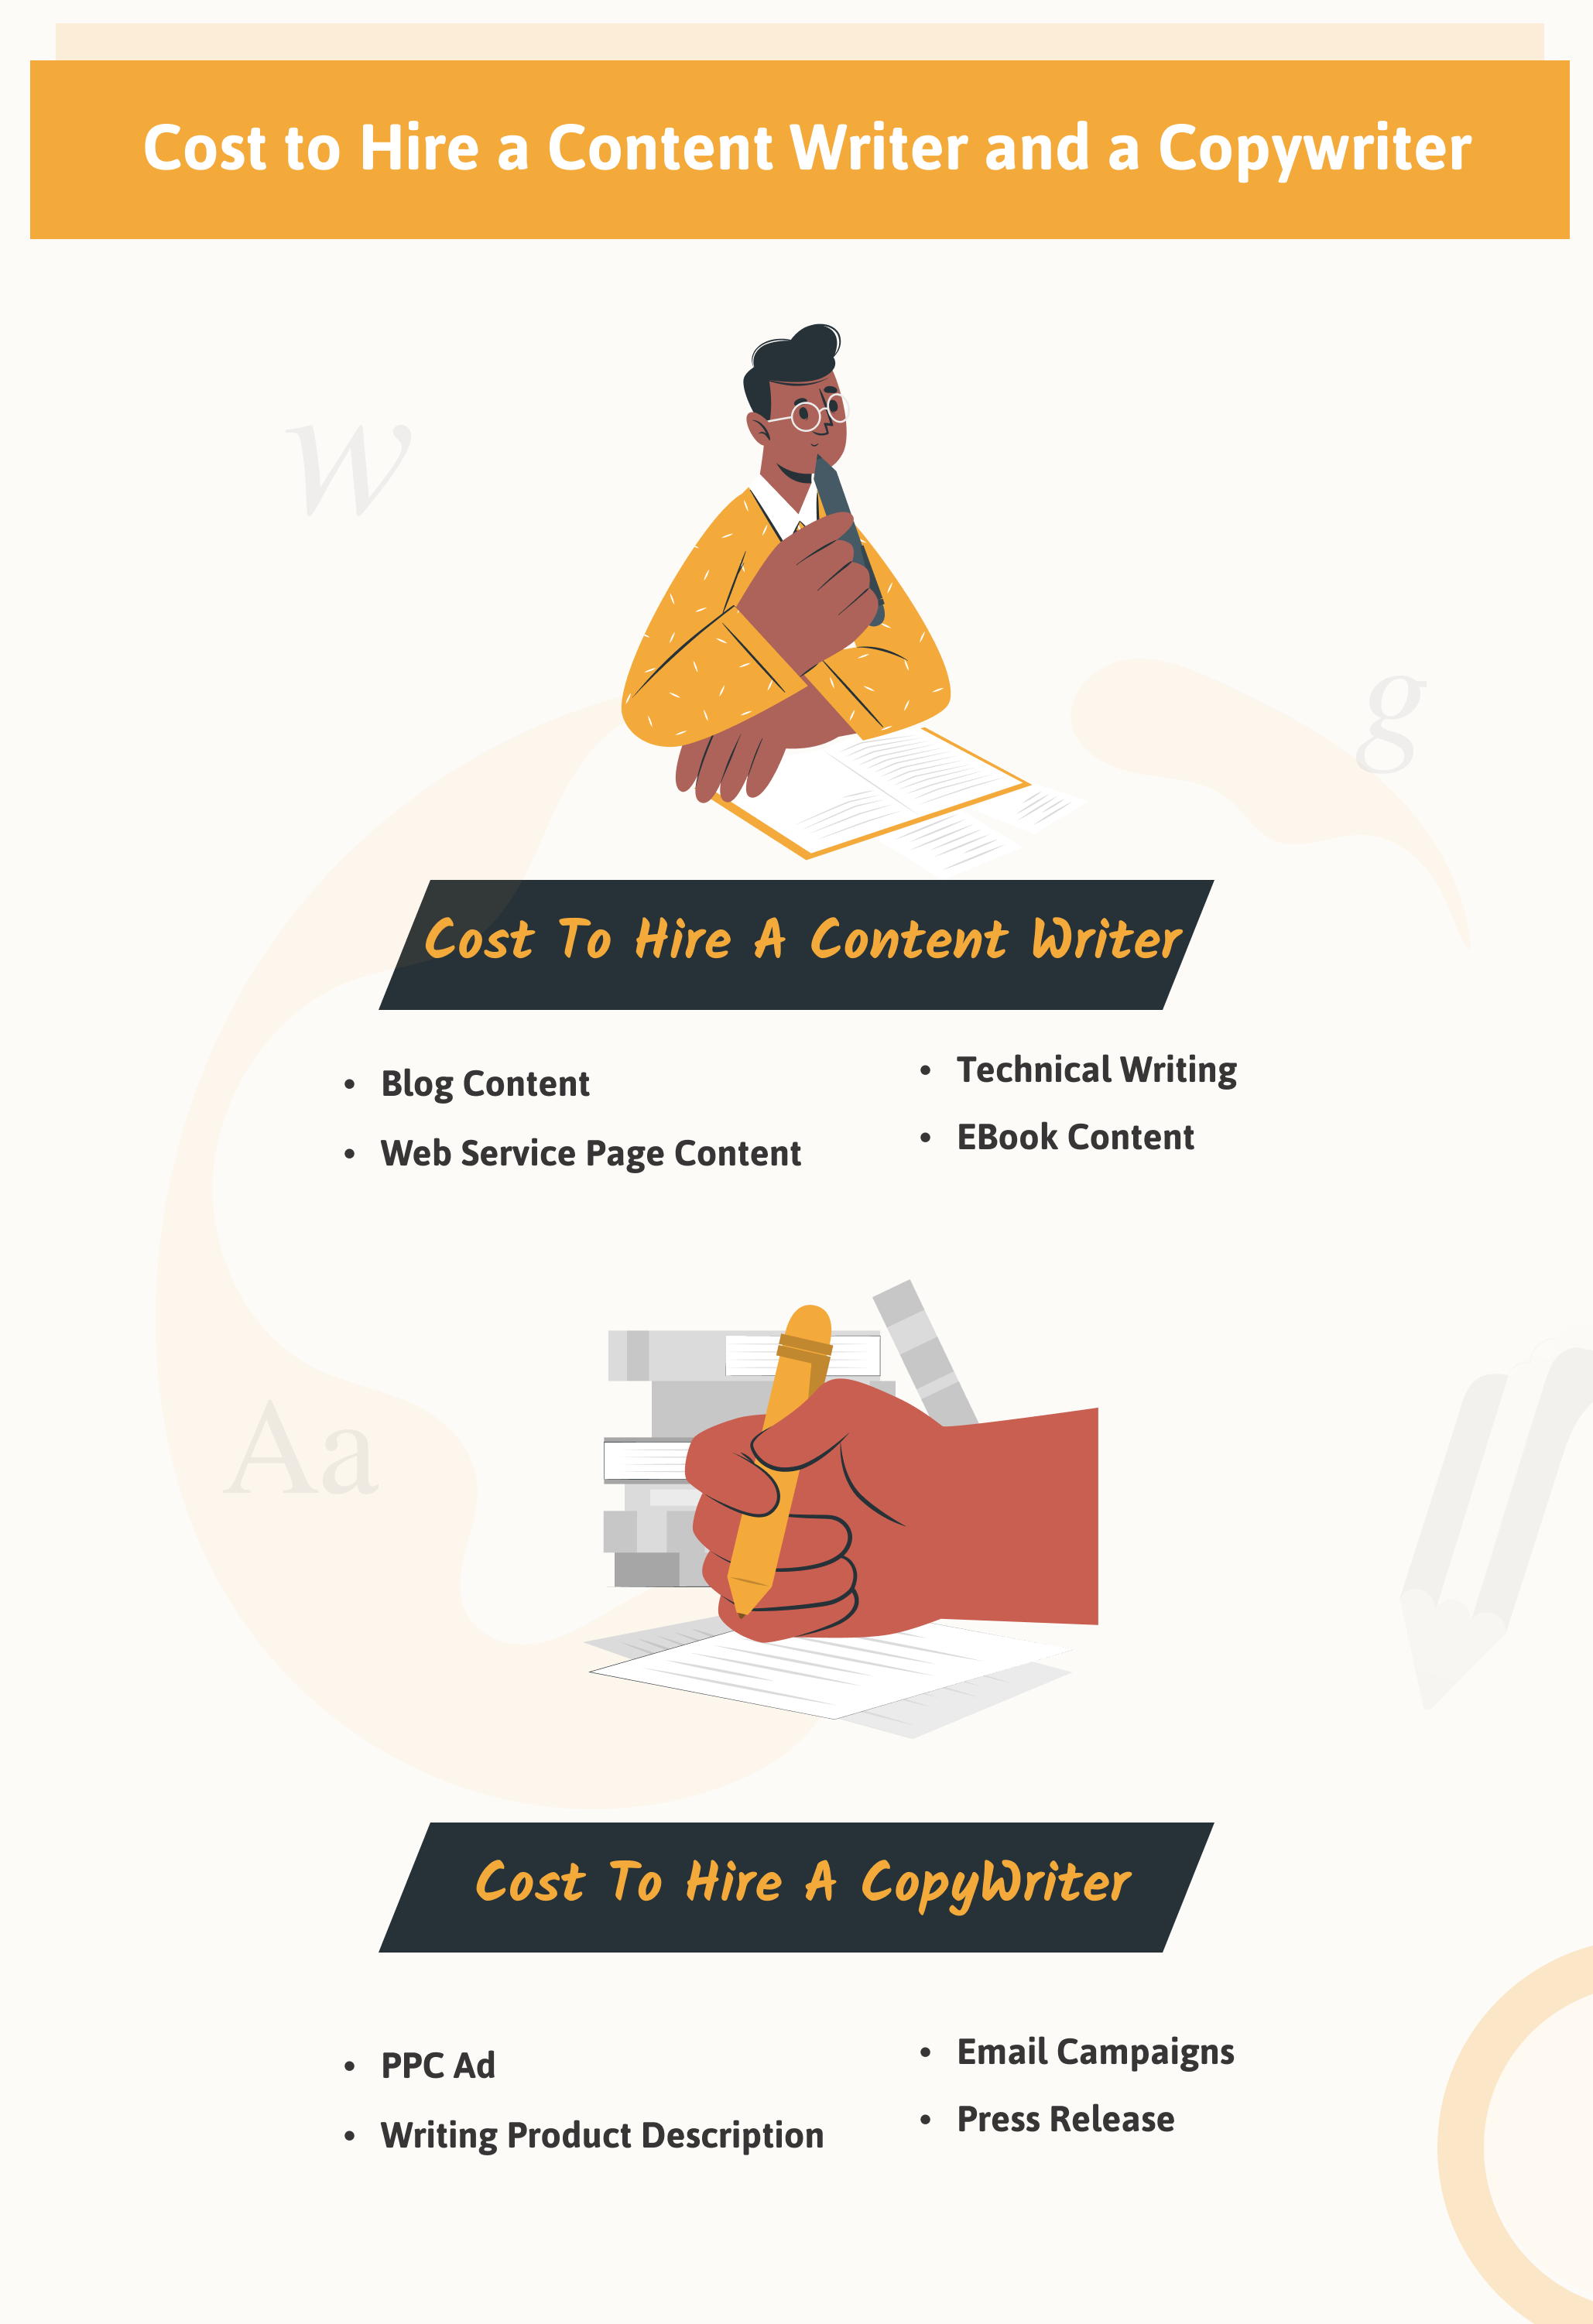 Cost to hire a content writer and a copywriter - Infographic